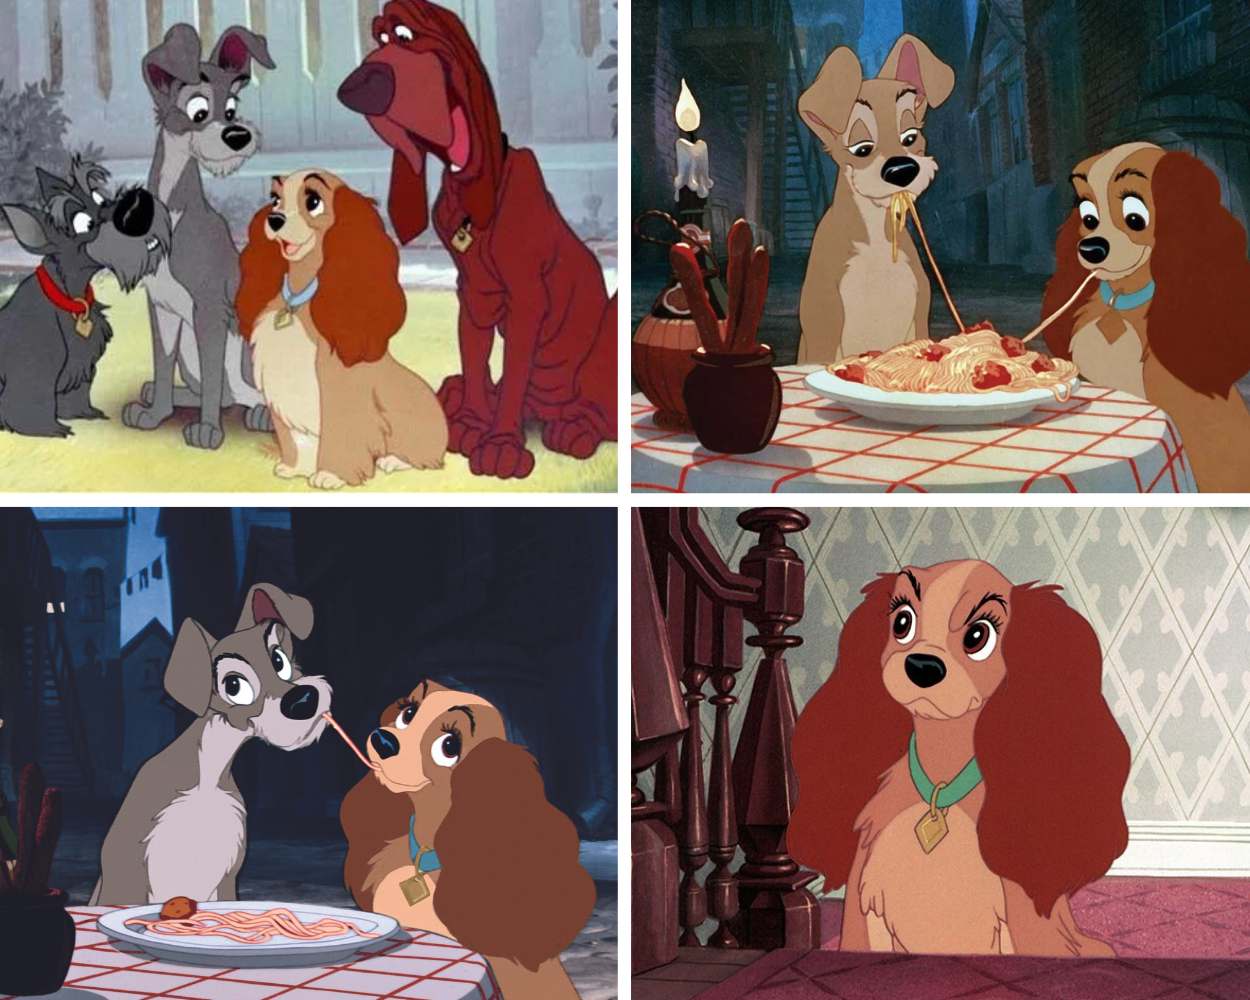 Lady and the Tramp (1955) - old dog cartoon movies